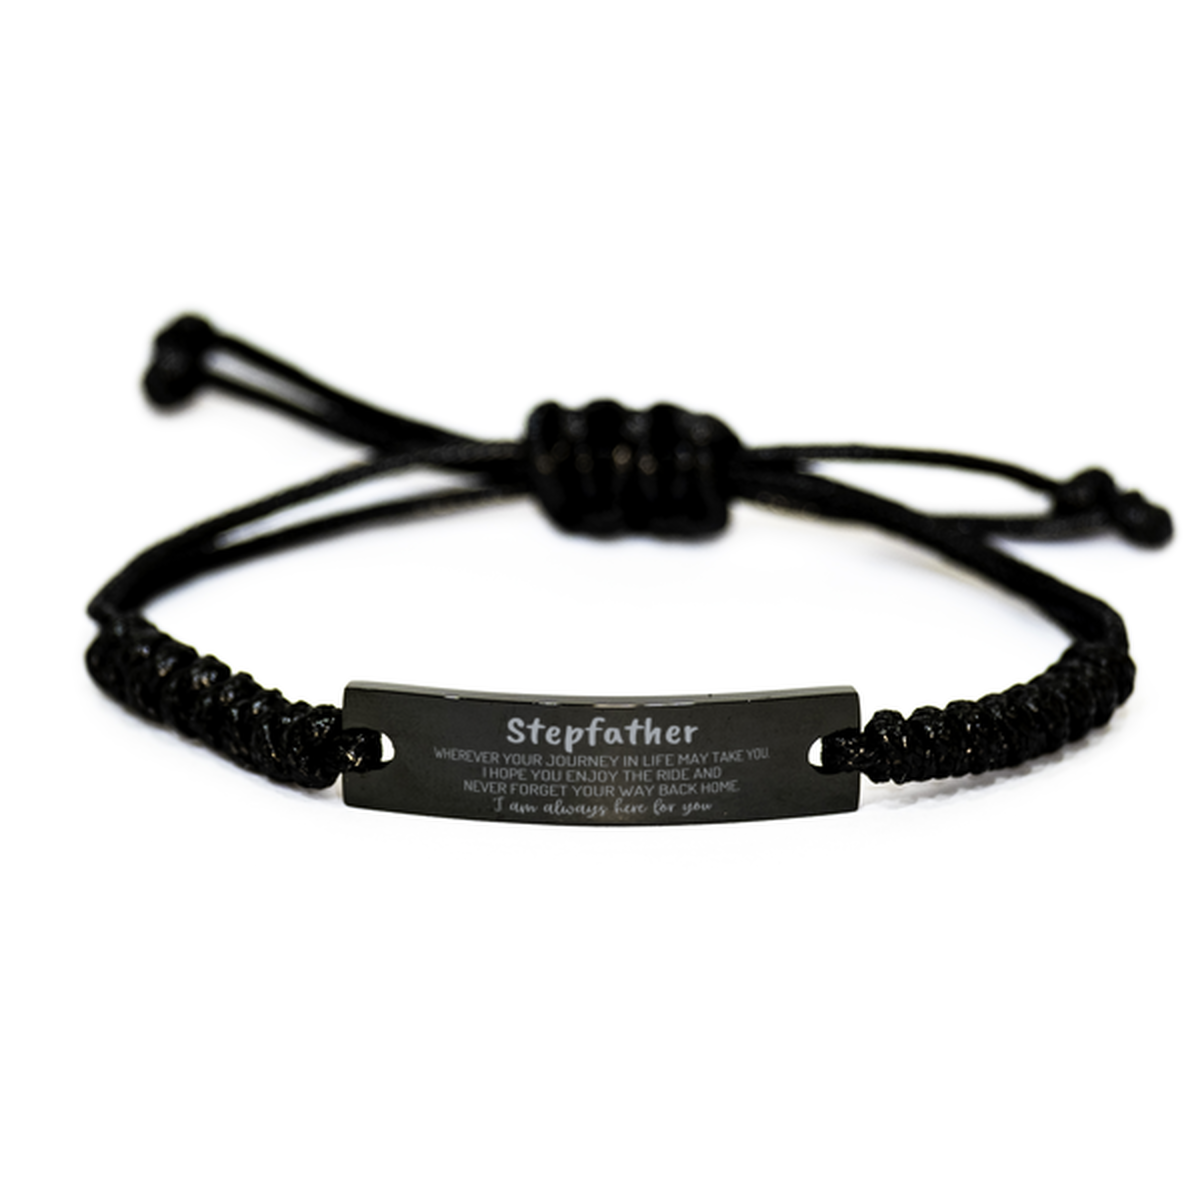 Stepfather wherever your journey in life may take you, I am always here for you Stepfather Black Rope Bracelet, Awesome Christmas Gifts For Stepfather, Stepfather Birthday Gifts for Men Women Family Loved One